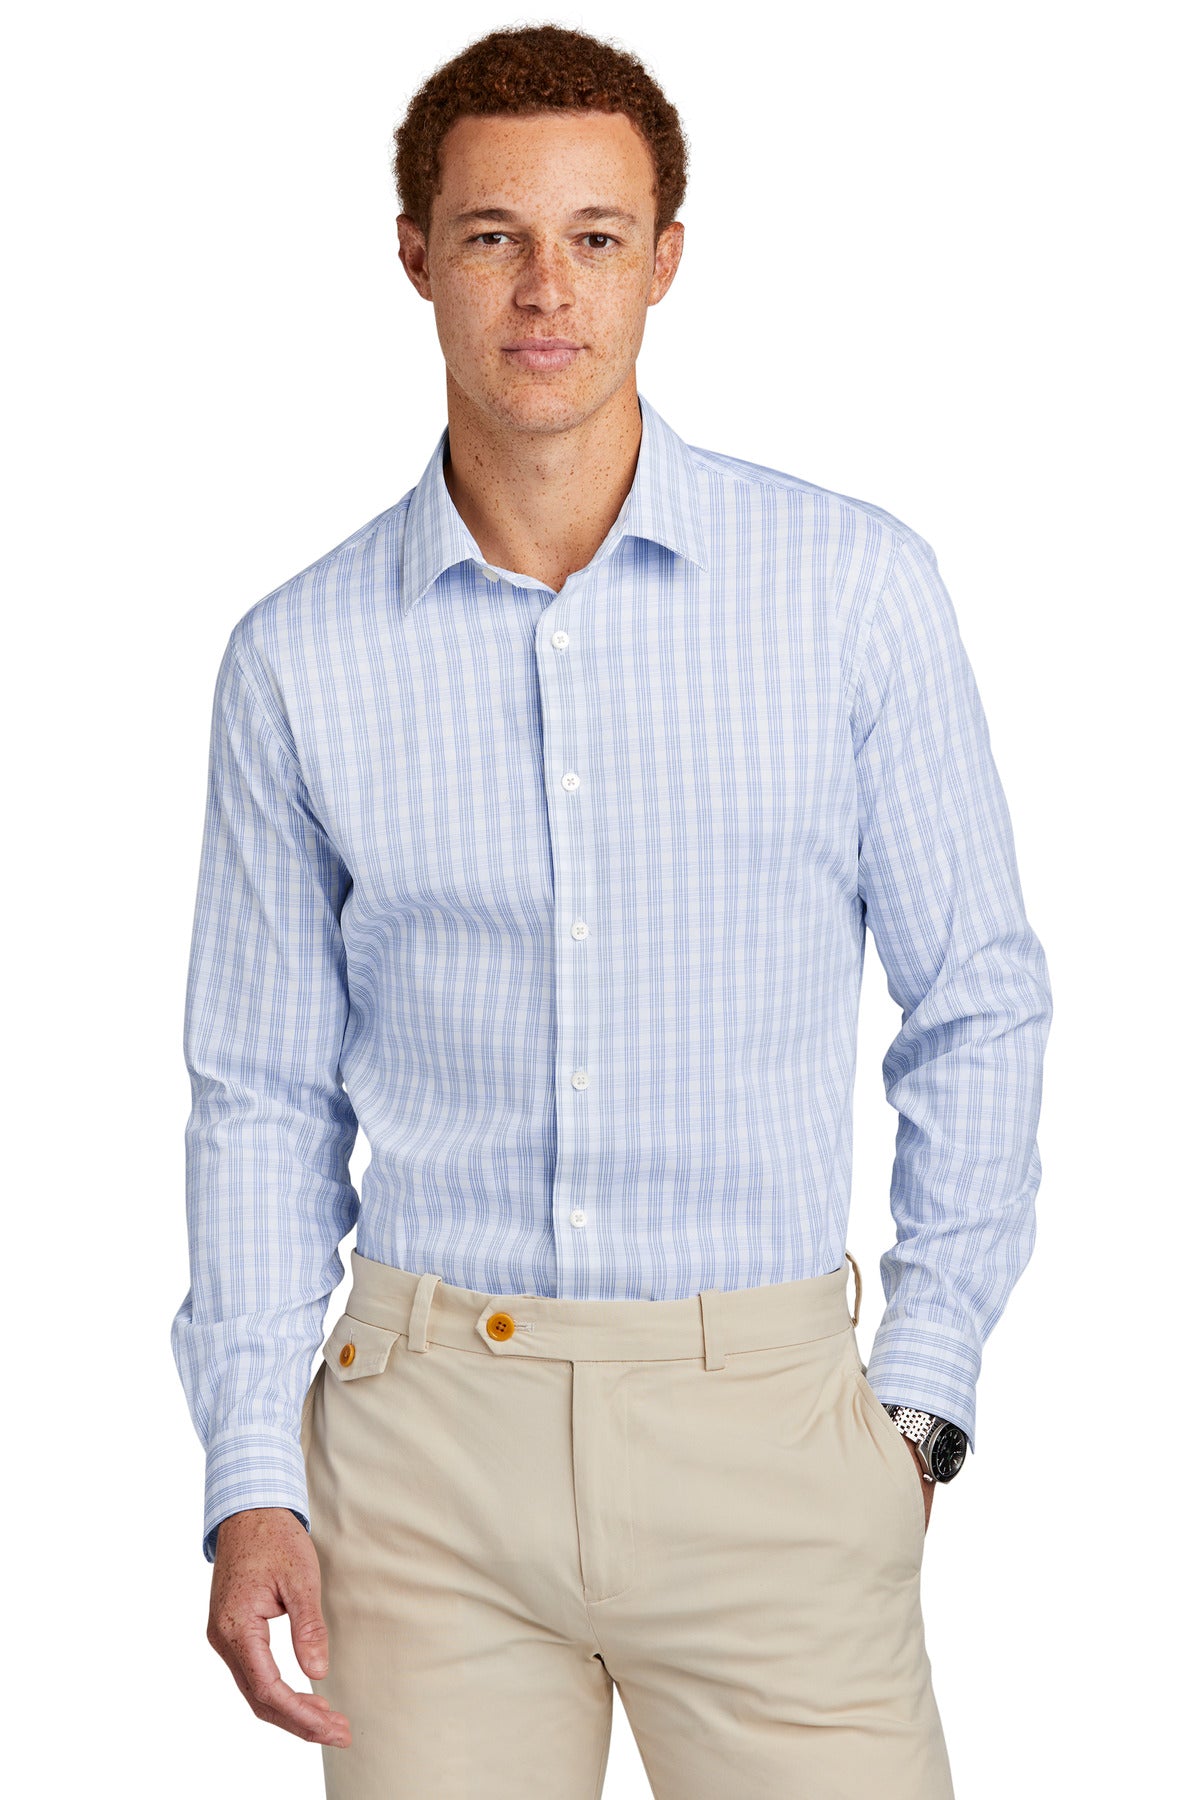 Woven Shirts White/ Newport Blue Grid Check Brooks Brothers